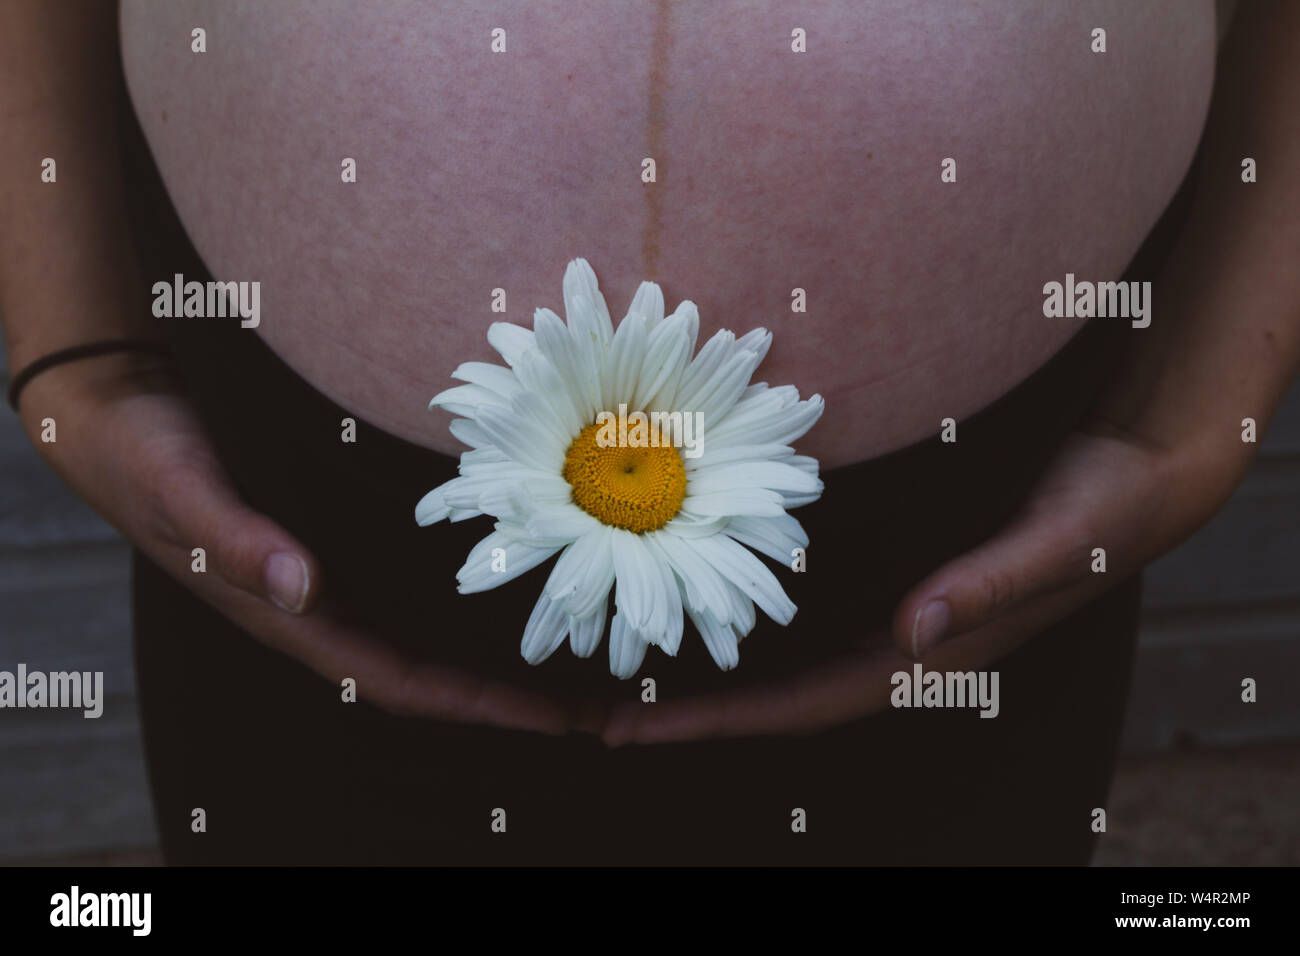 Pregnant woman late in the third trimester cradling her baby bump with a white flower symbolizing the new life growing within her. Stock Photo